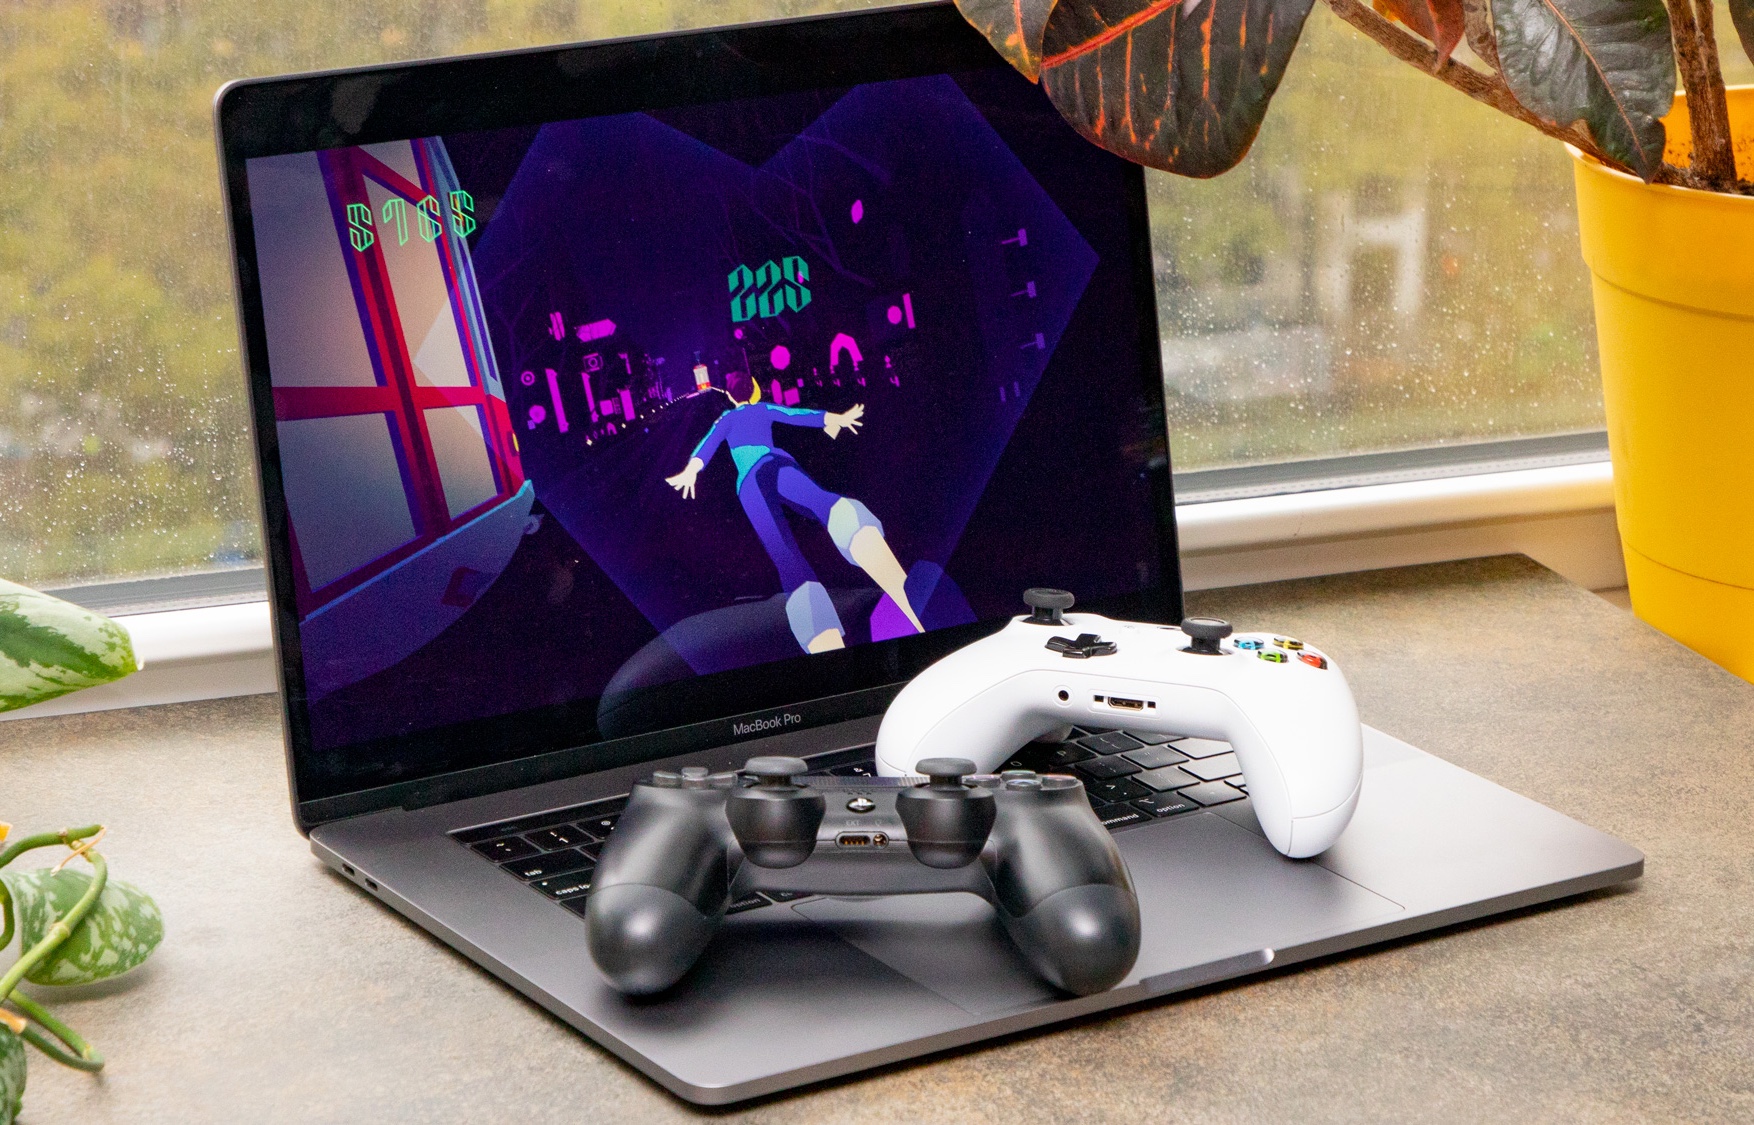 How To Pair Ps4 And Xbox One Controllers In Macos Catalina